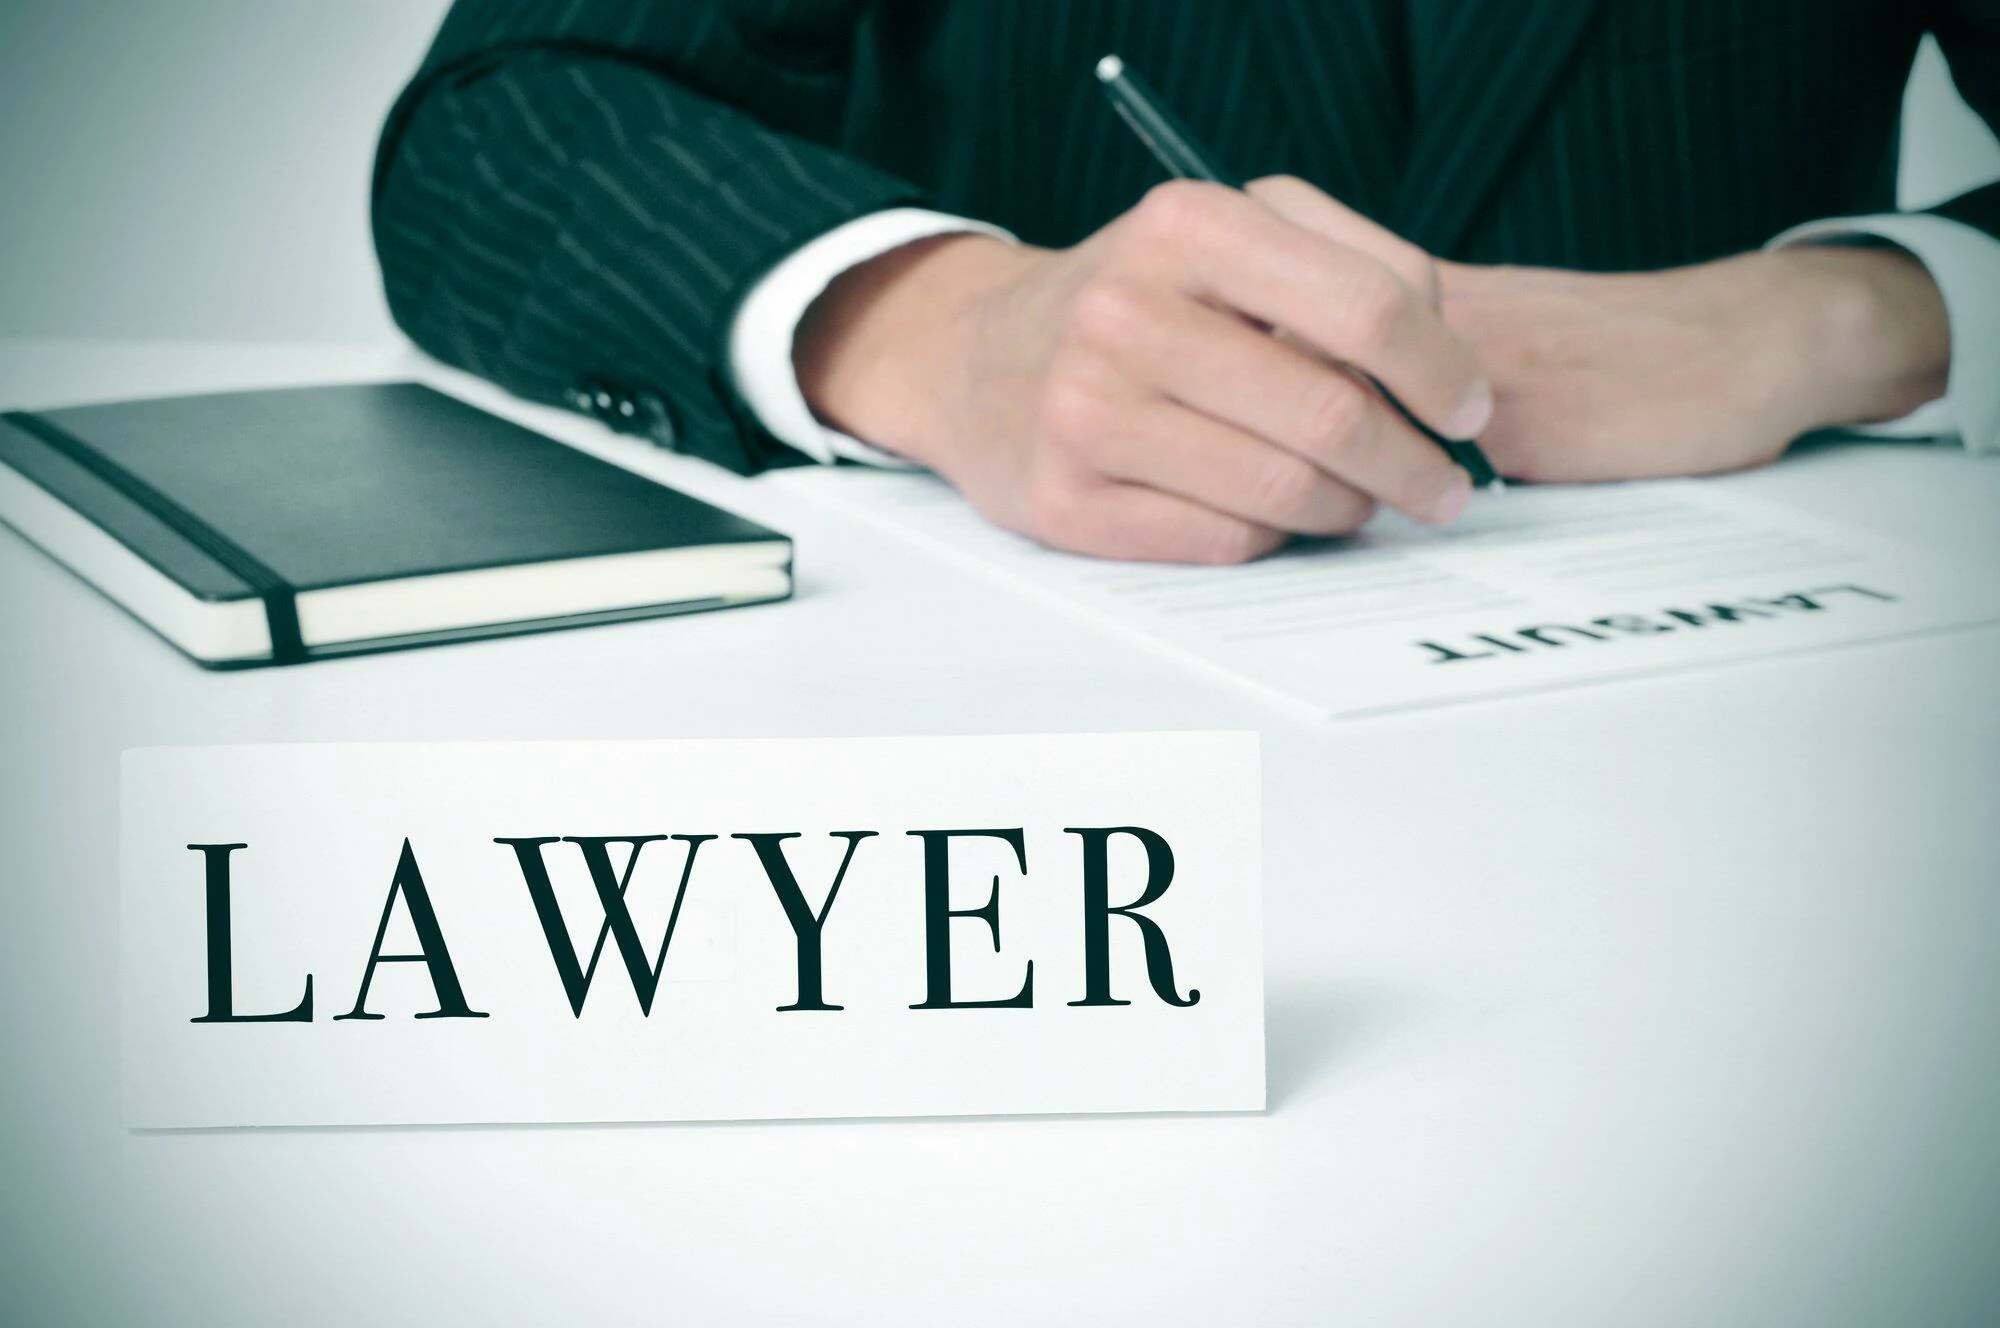 From Wills to Lawsuits: The Scope of Services Offered by a Personal Attorney